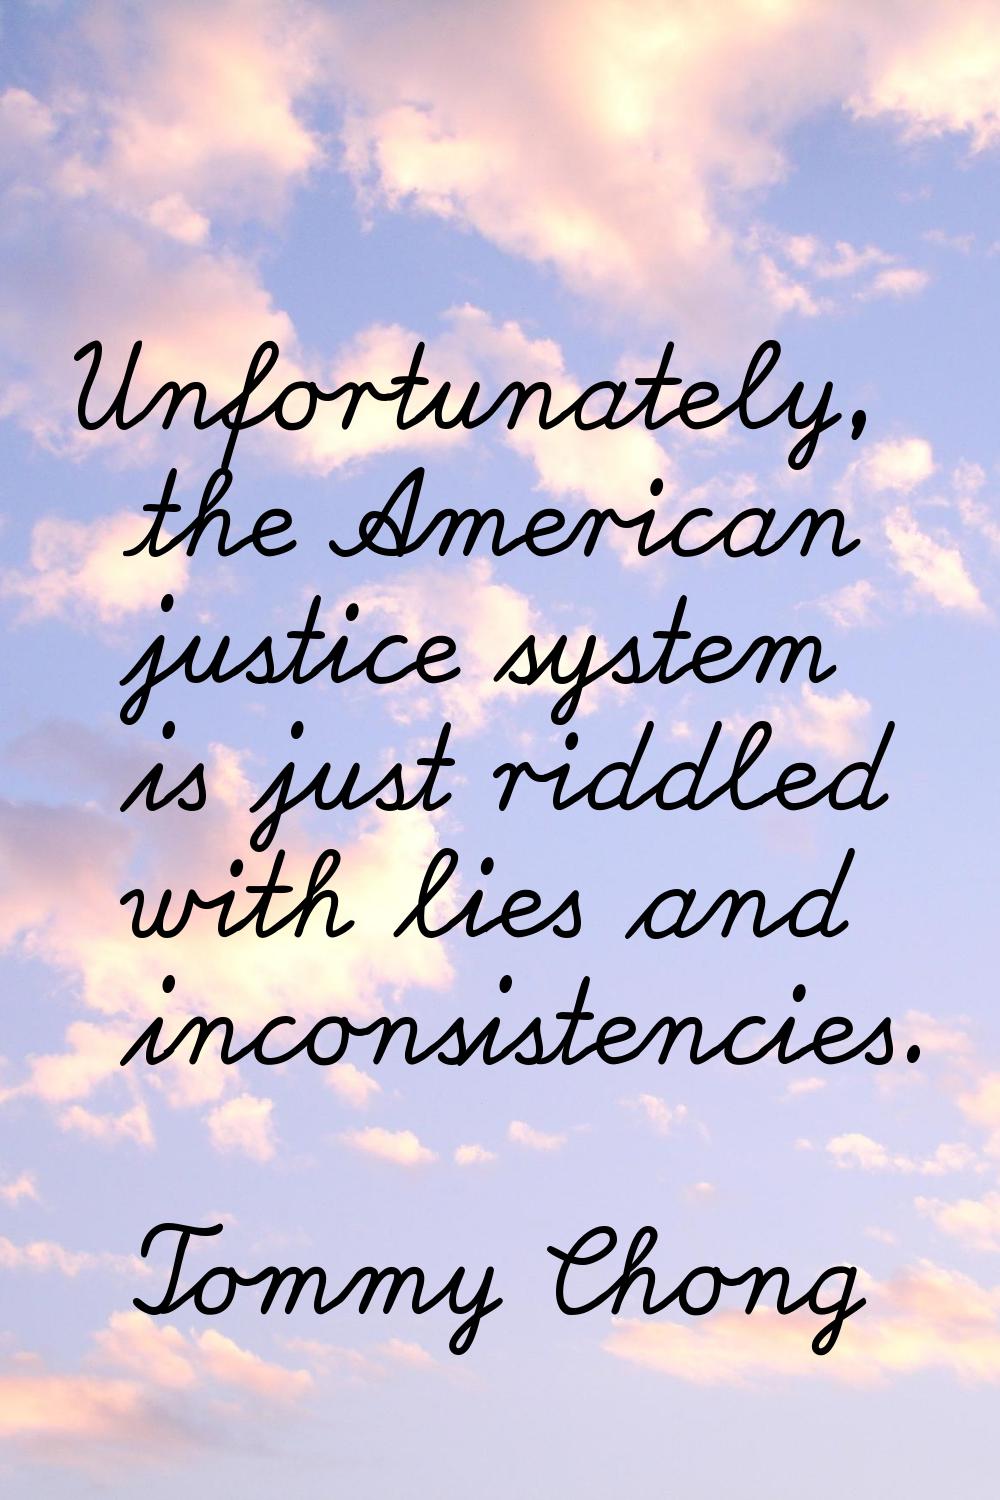 Unfortunately, the American justice system is just riddled with lies and inconsistencies.